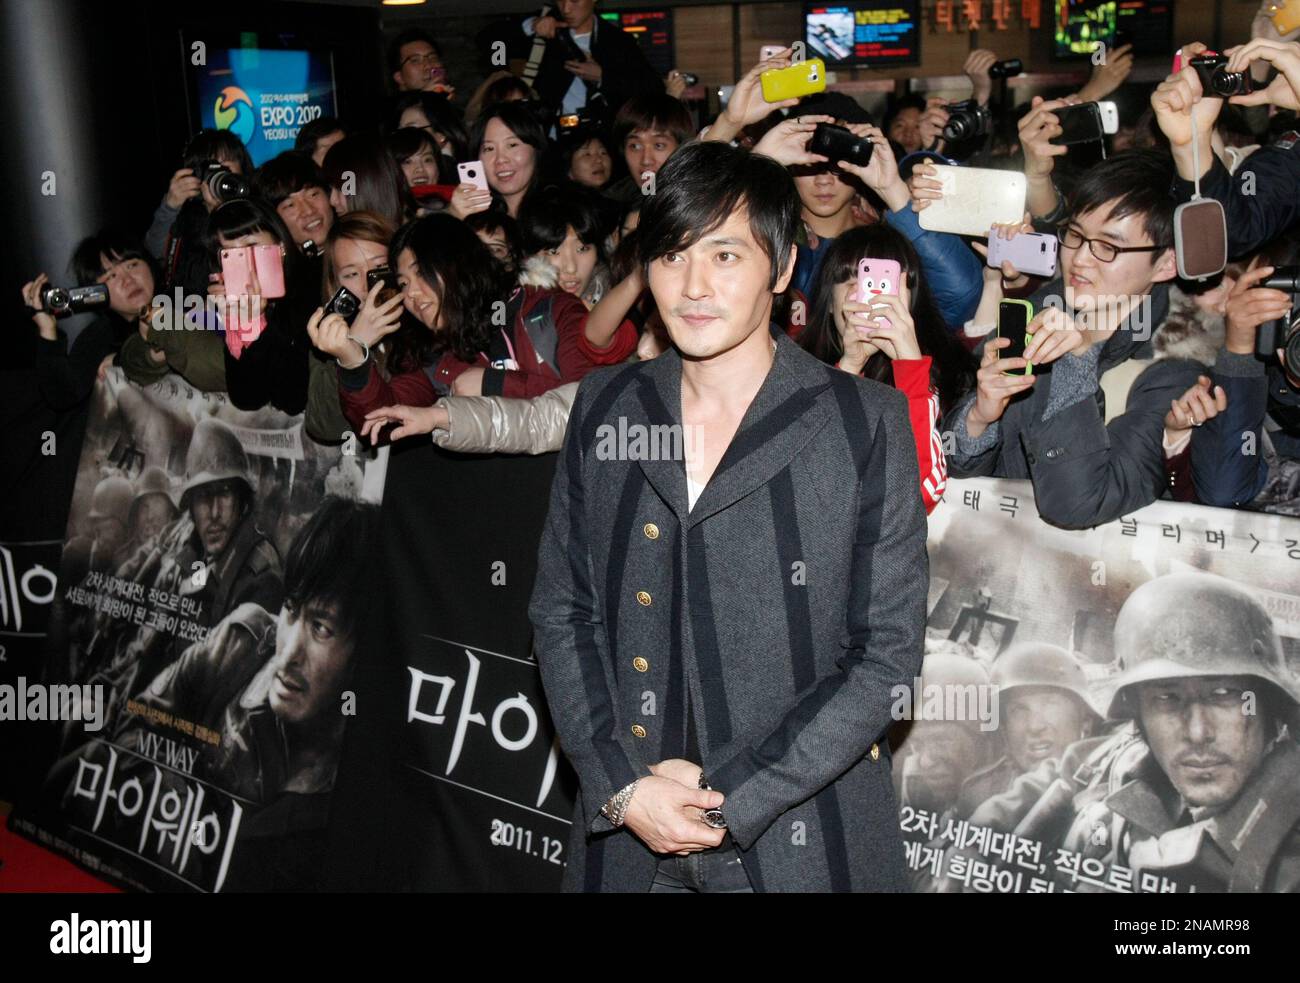 South Korean actor Jang Dong-gun poses during a promotional event for his latest movie "My Way" in Seoul, South Korea, Tuesday, Dec. 13, 2011. (AP Photo/Ahn Young-joon) Stockfoto